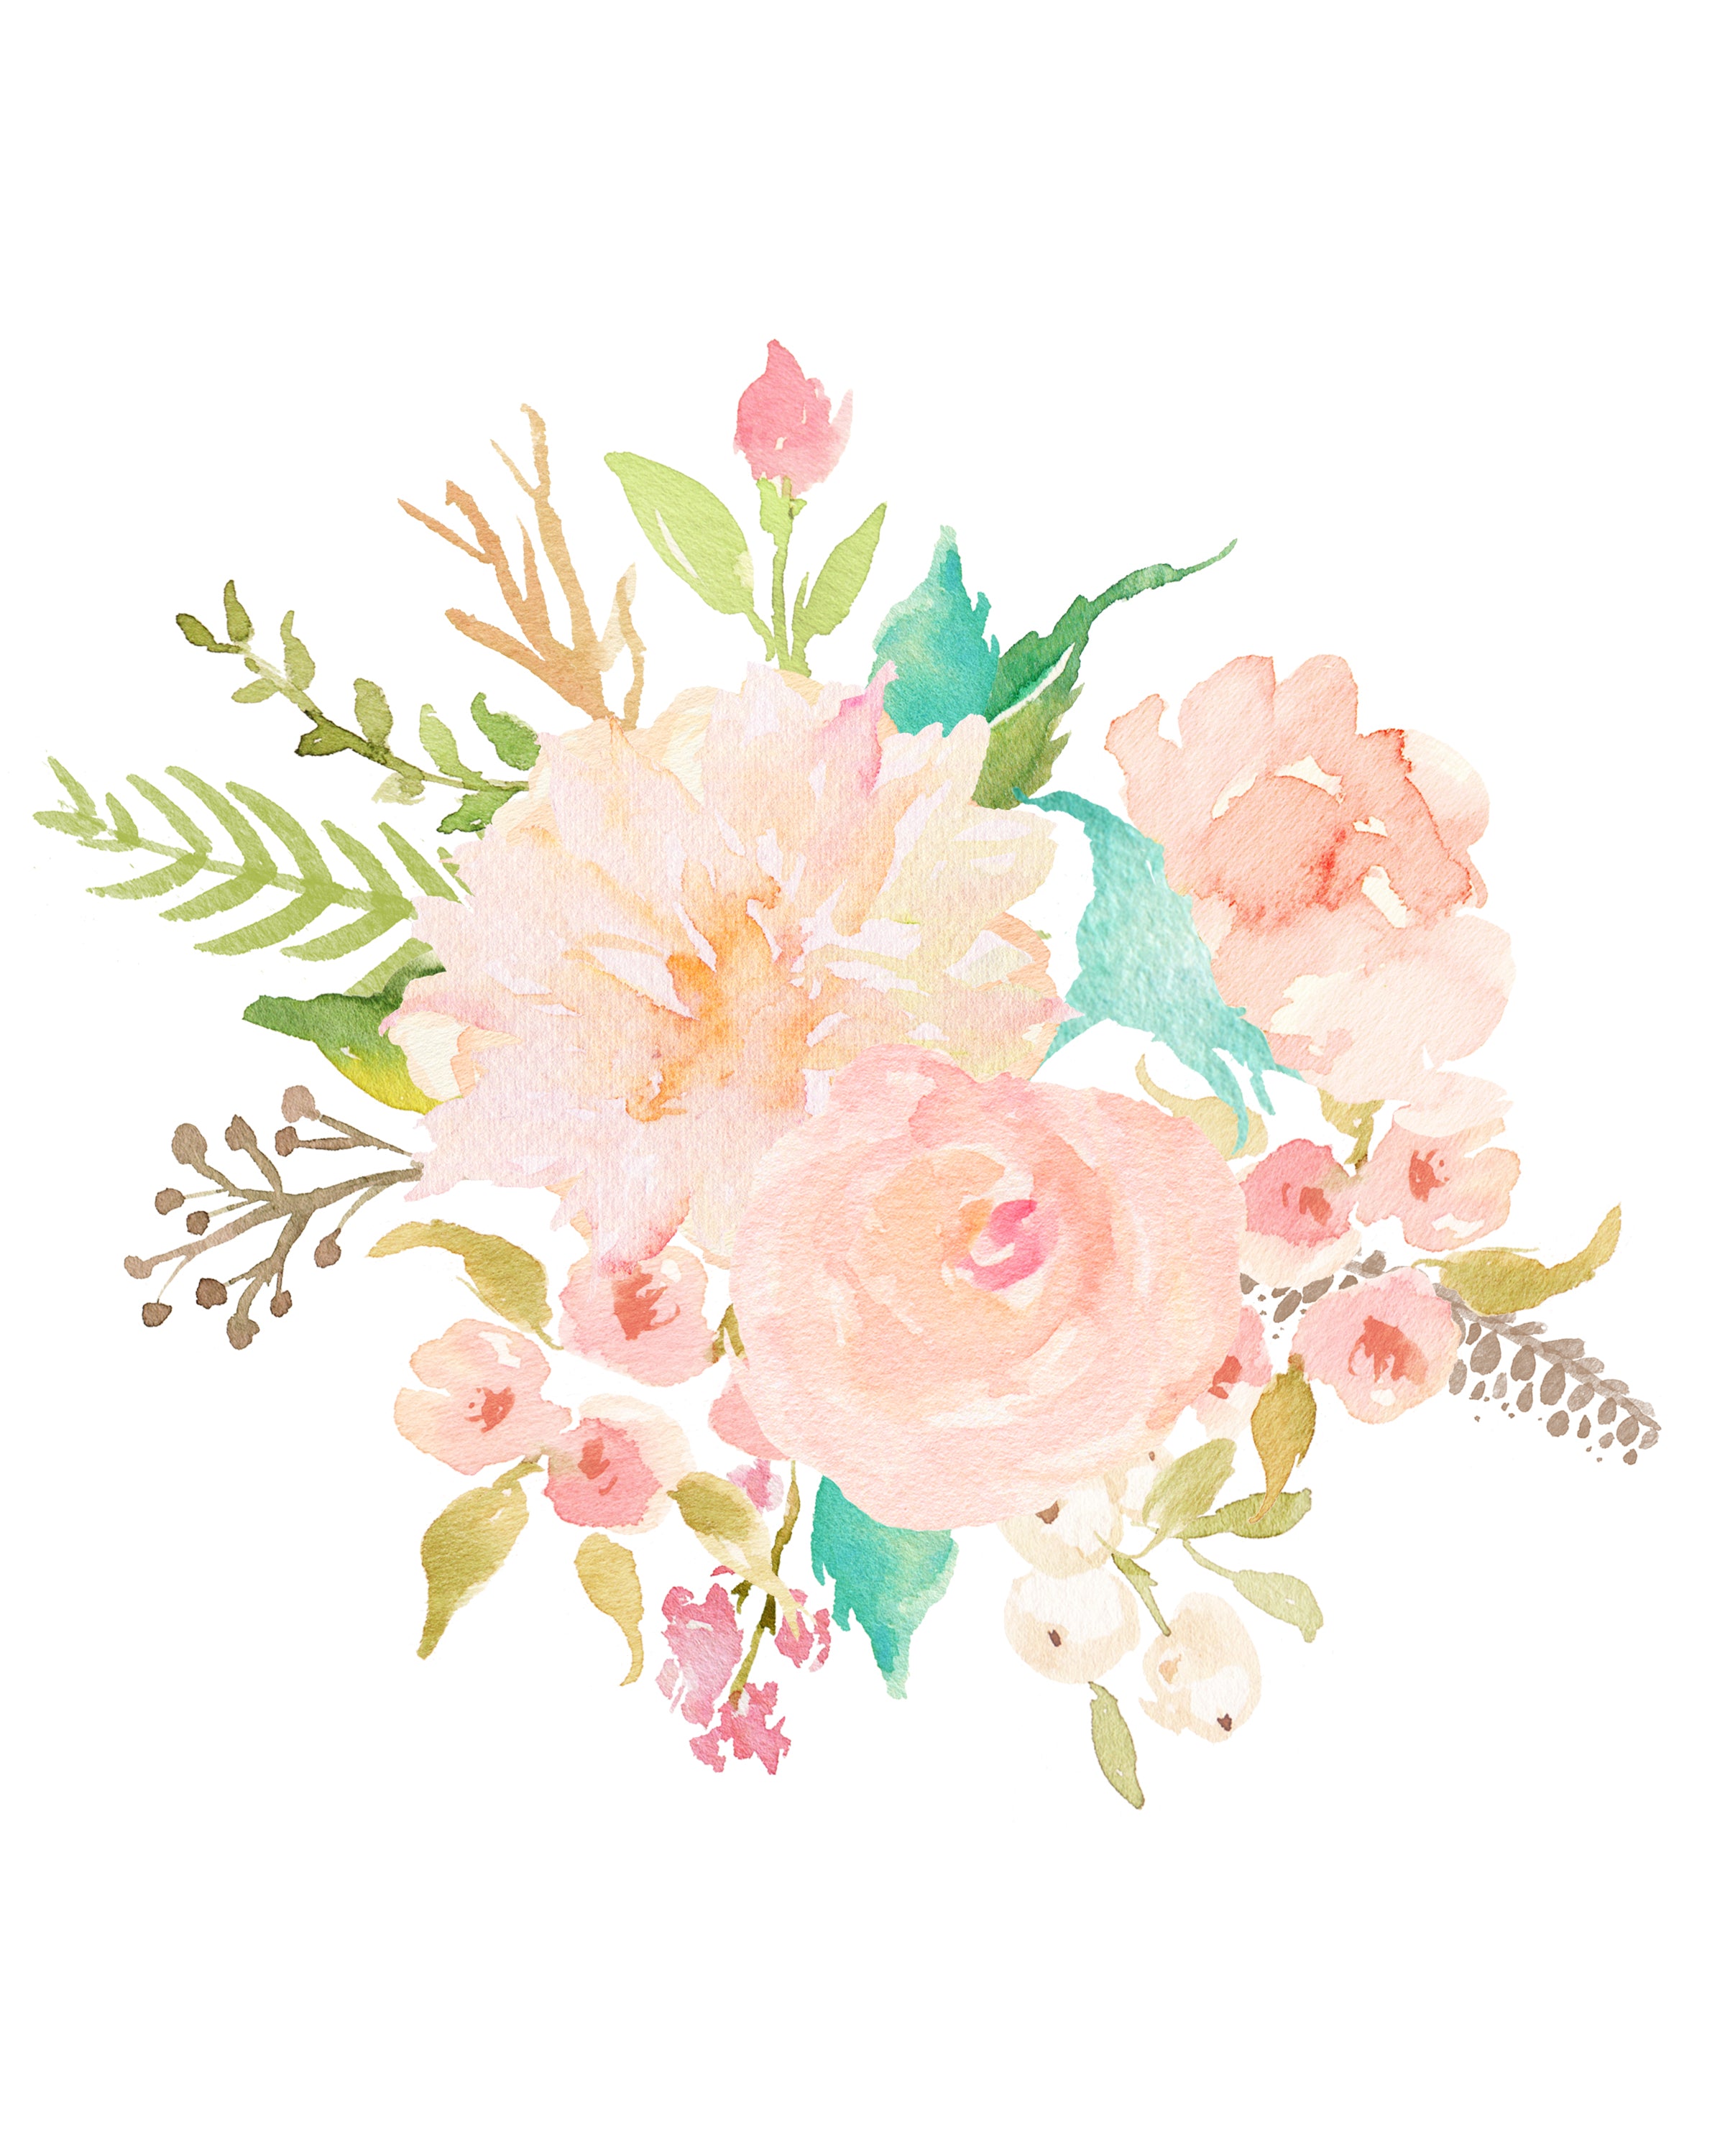 Floral Whimsy - Bouquet I - Print